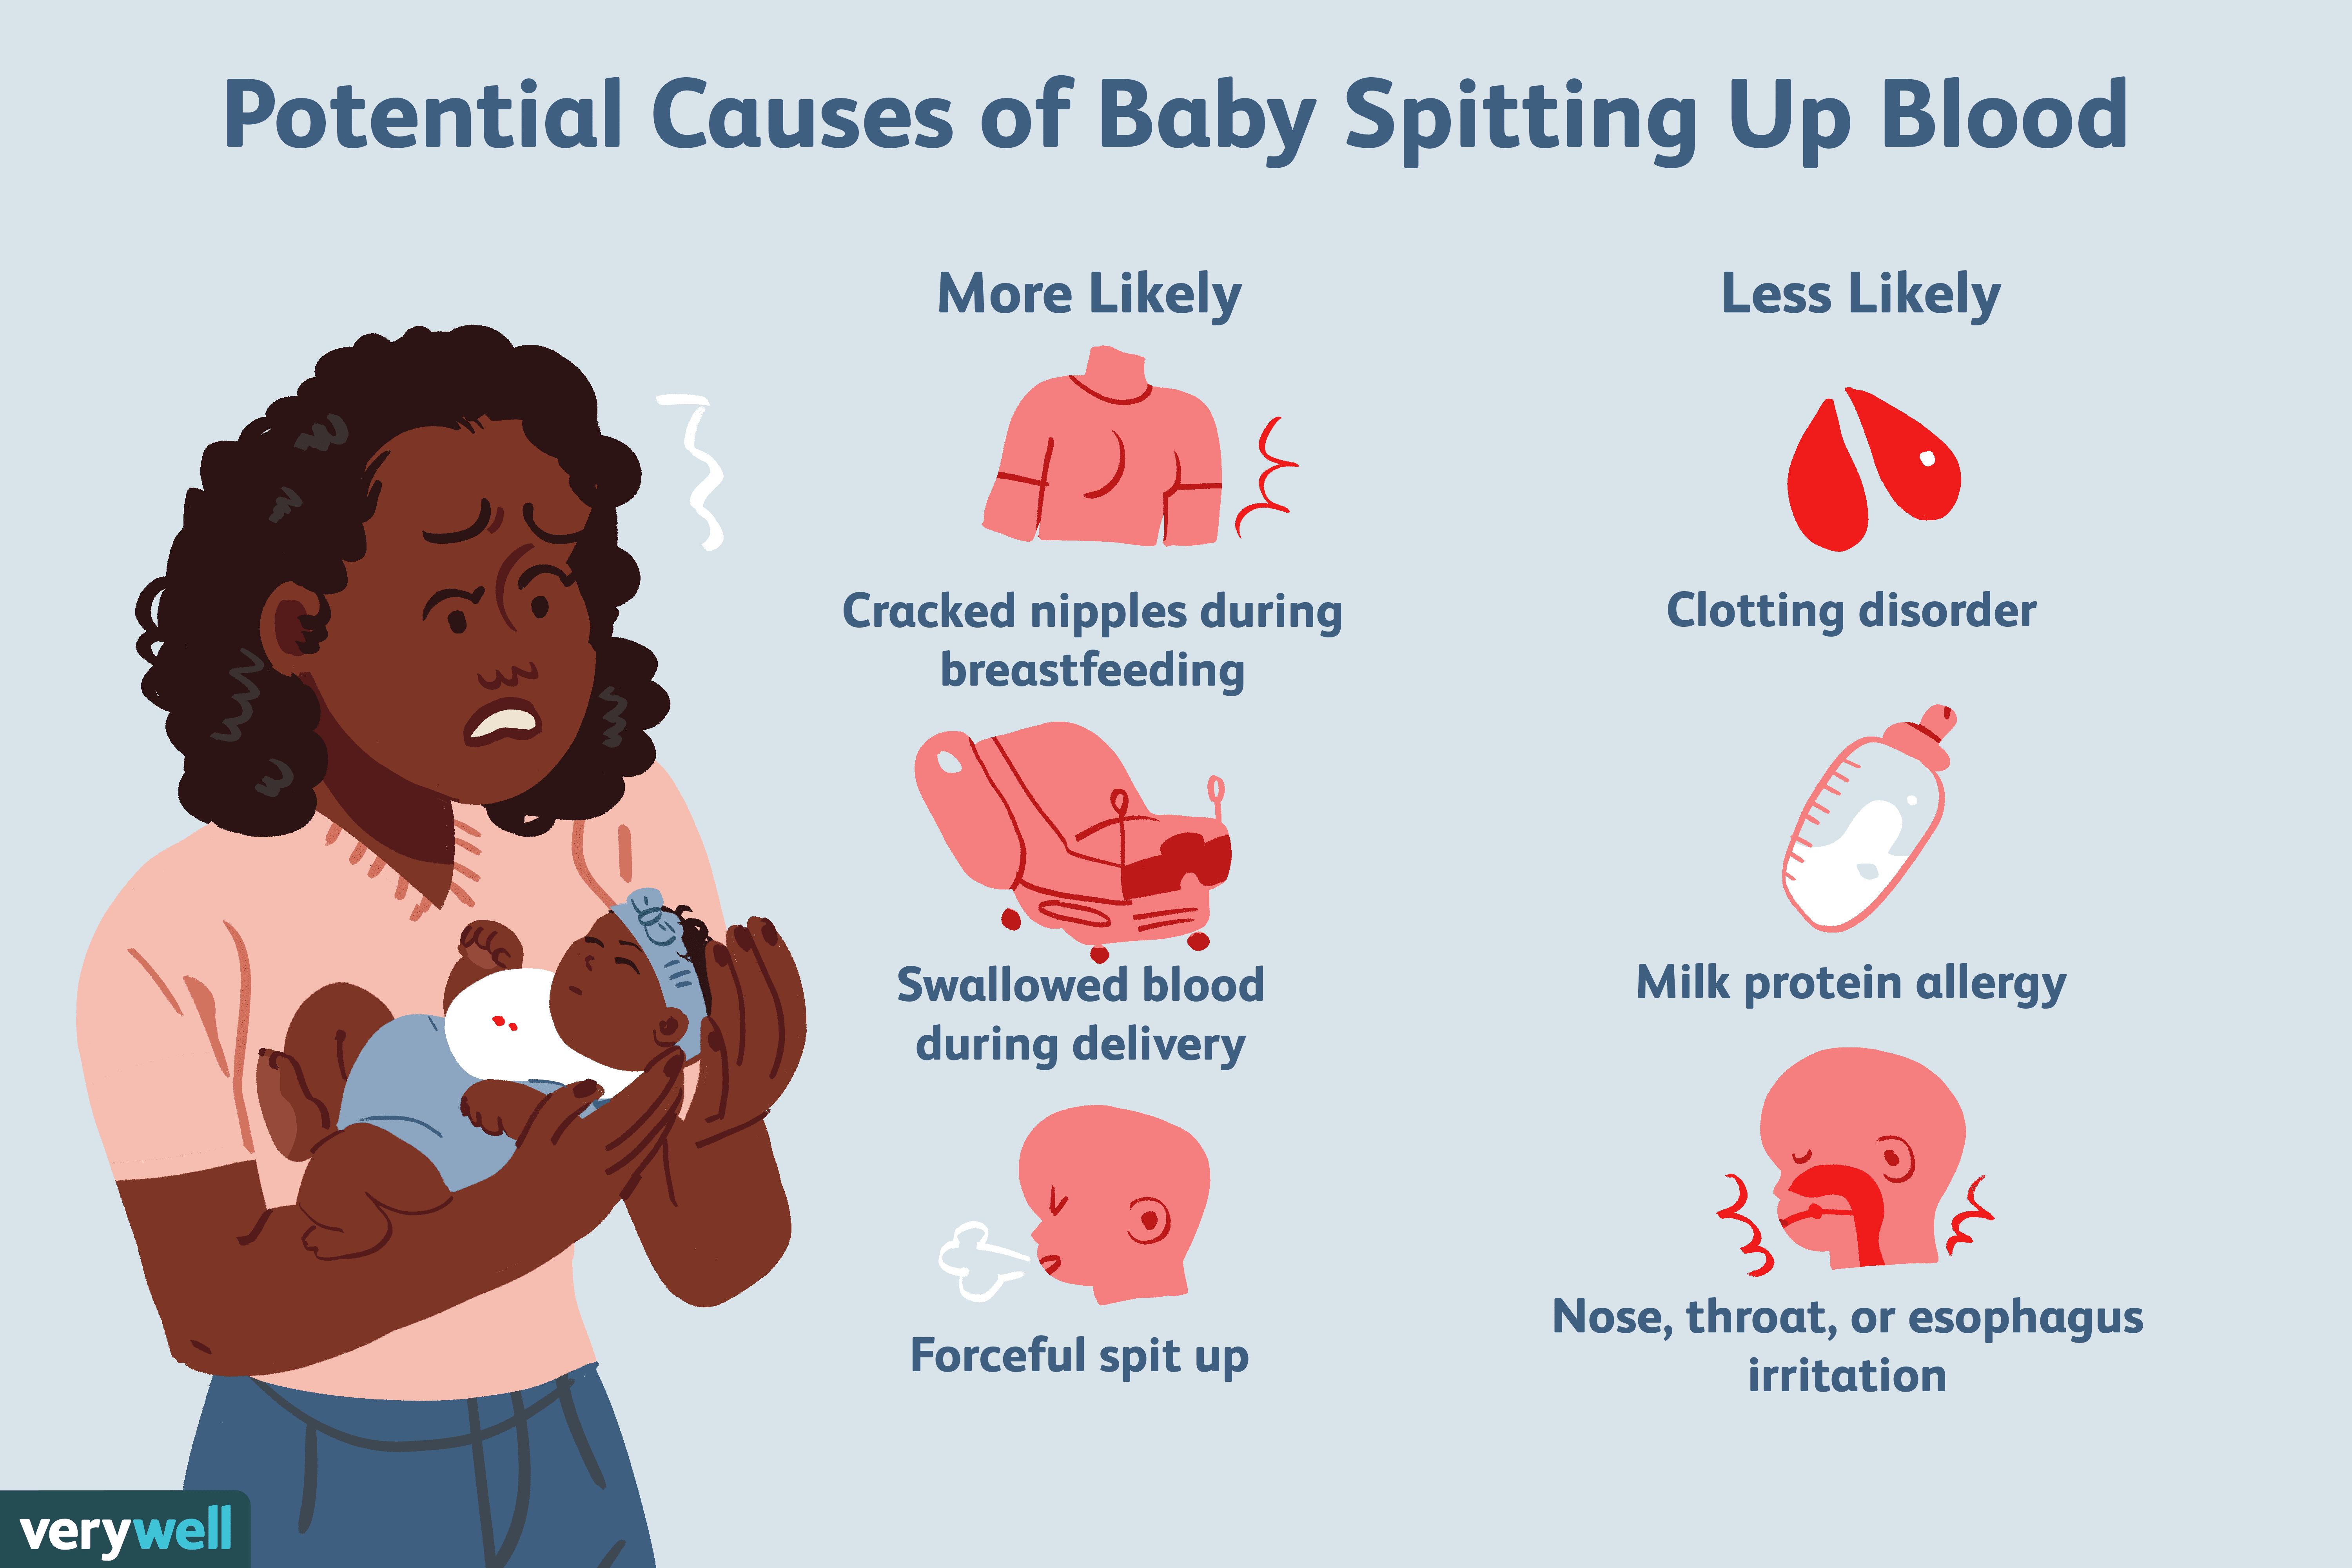 Most Likely Causes When a Baby Spits up Blood